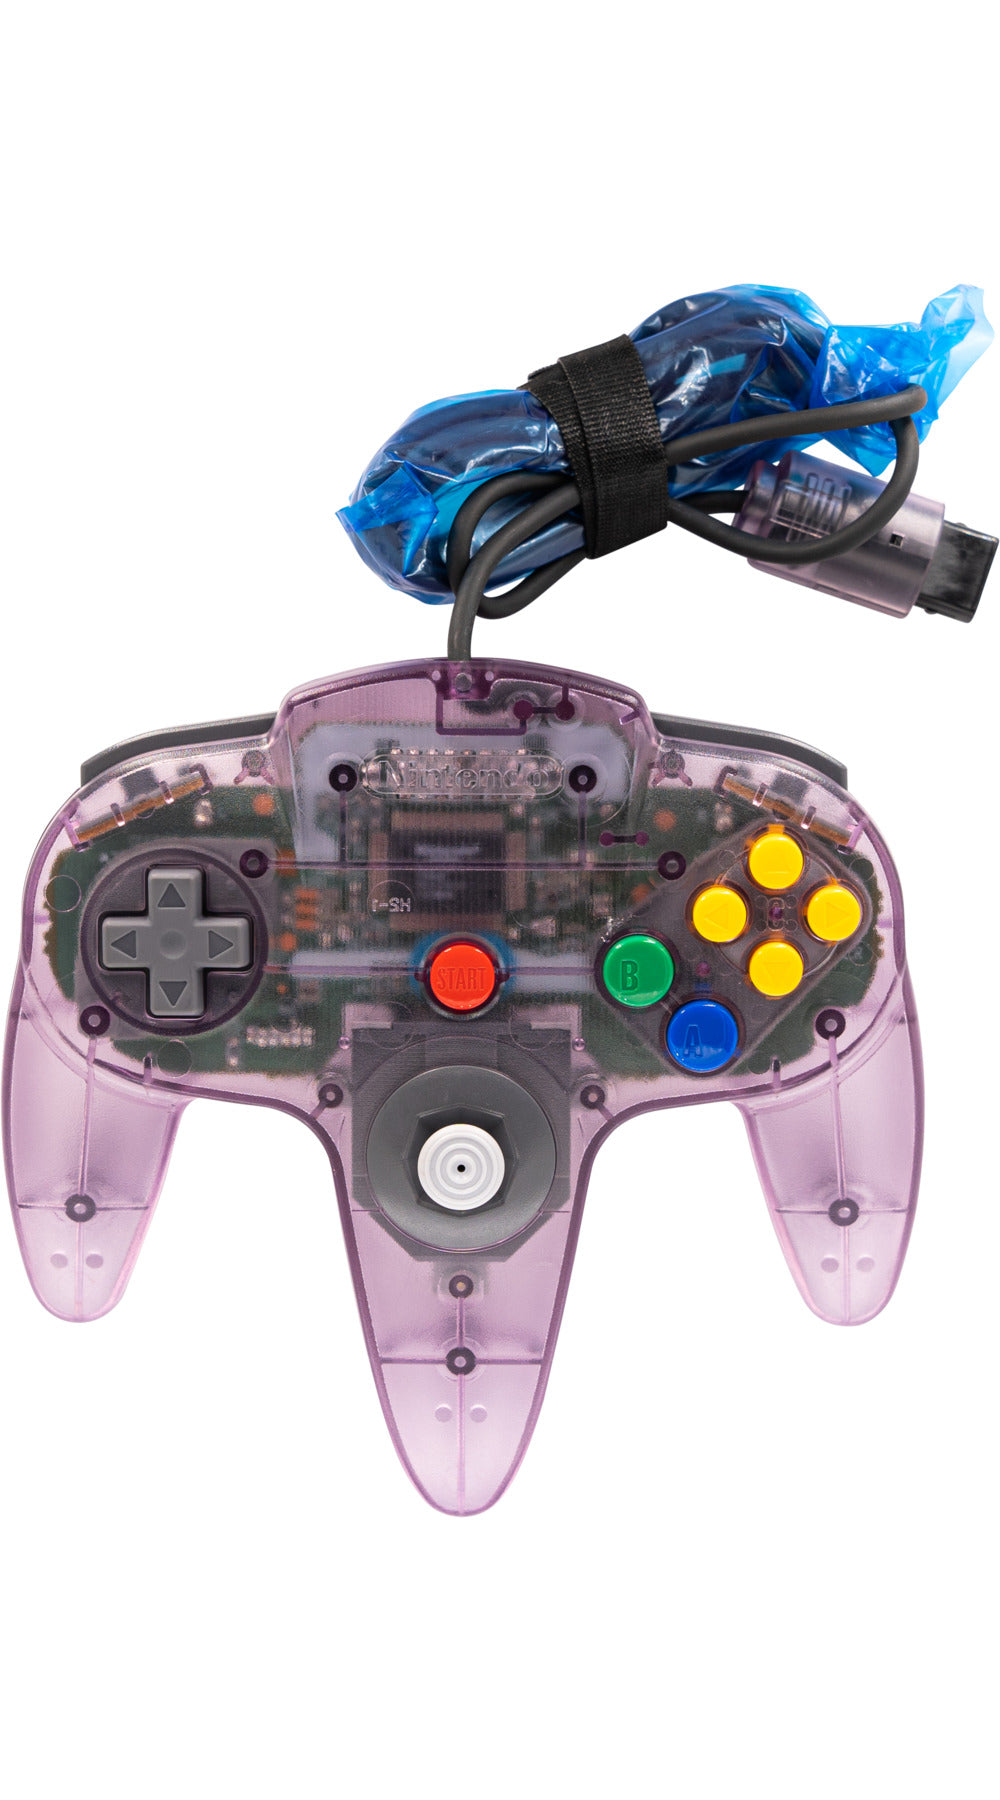 Atomic Purple N64 Controller Official Nintendo Brand, 44% OFF